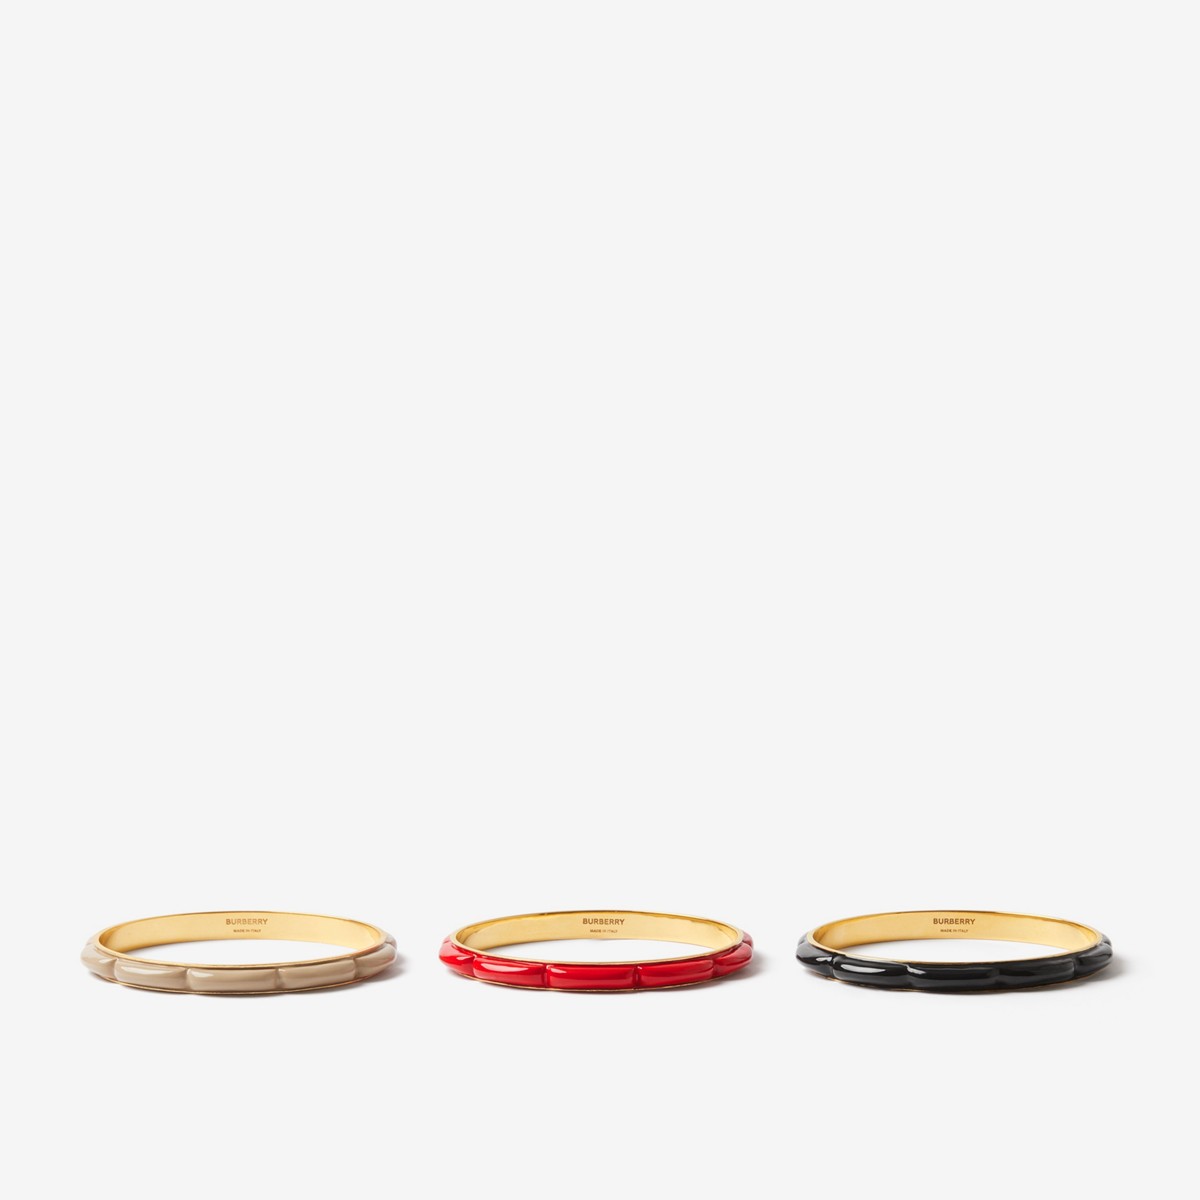 BURBERRY BURBERRY ENAMEL AND GOLD-PLATED LOLA BANGLES